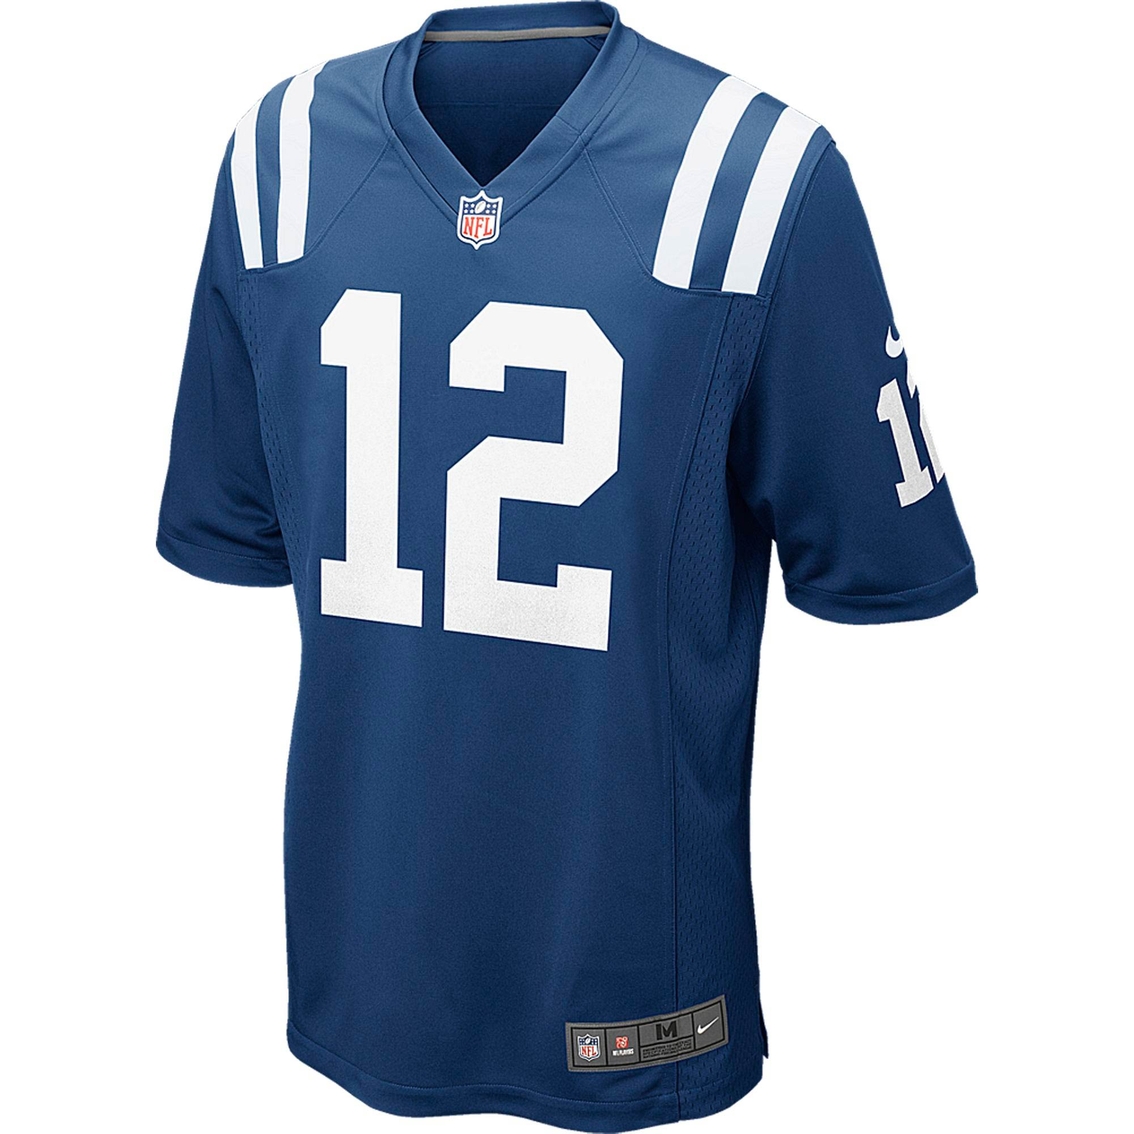 Nike Nfl Indianapolis Colts Andrew Luck Game Jersey Jerseys Sports ...